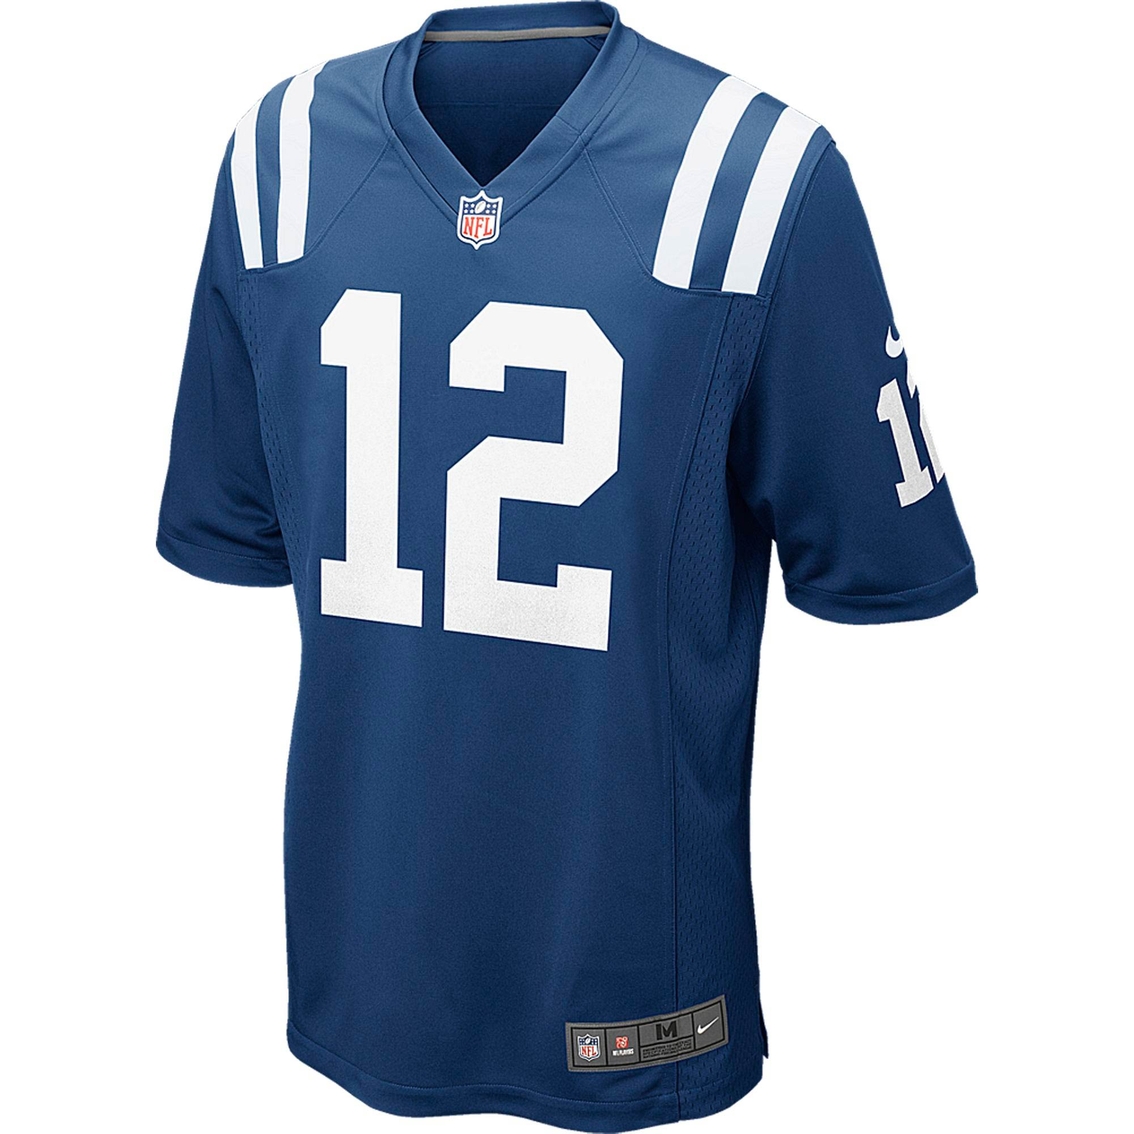 Nike Nfl Indianapolis Colts Andrew Luck Game Jersey Jerseys Sports ...